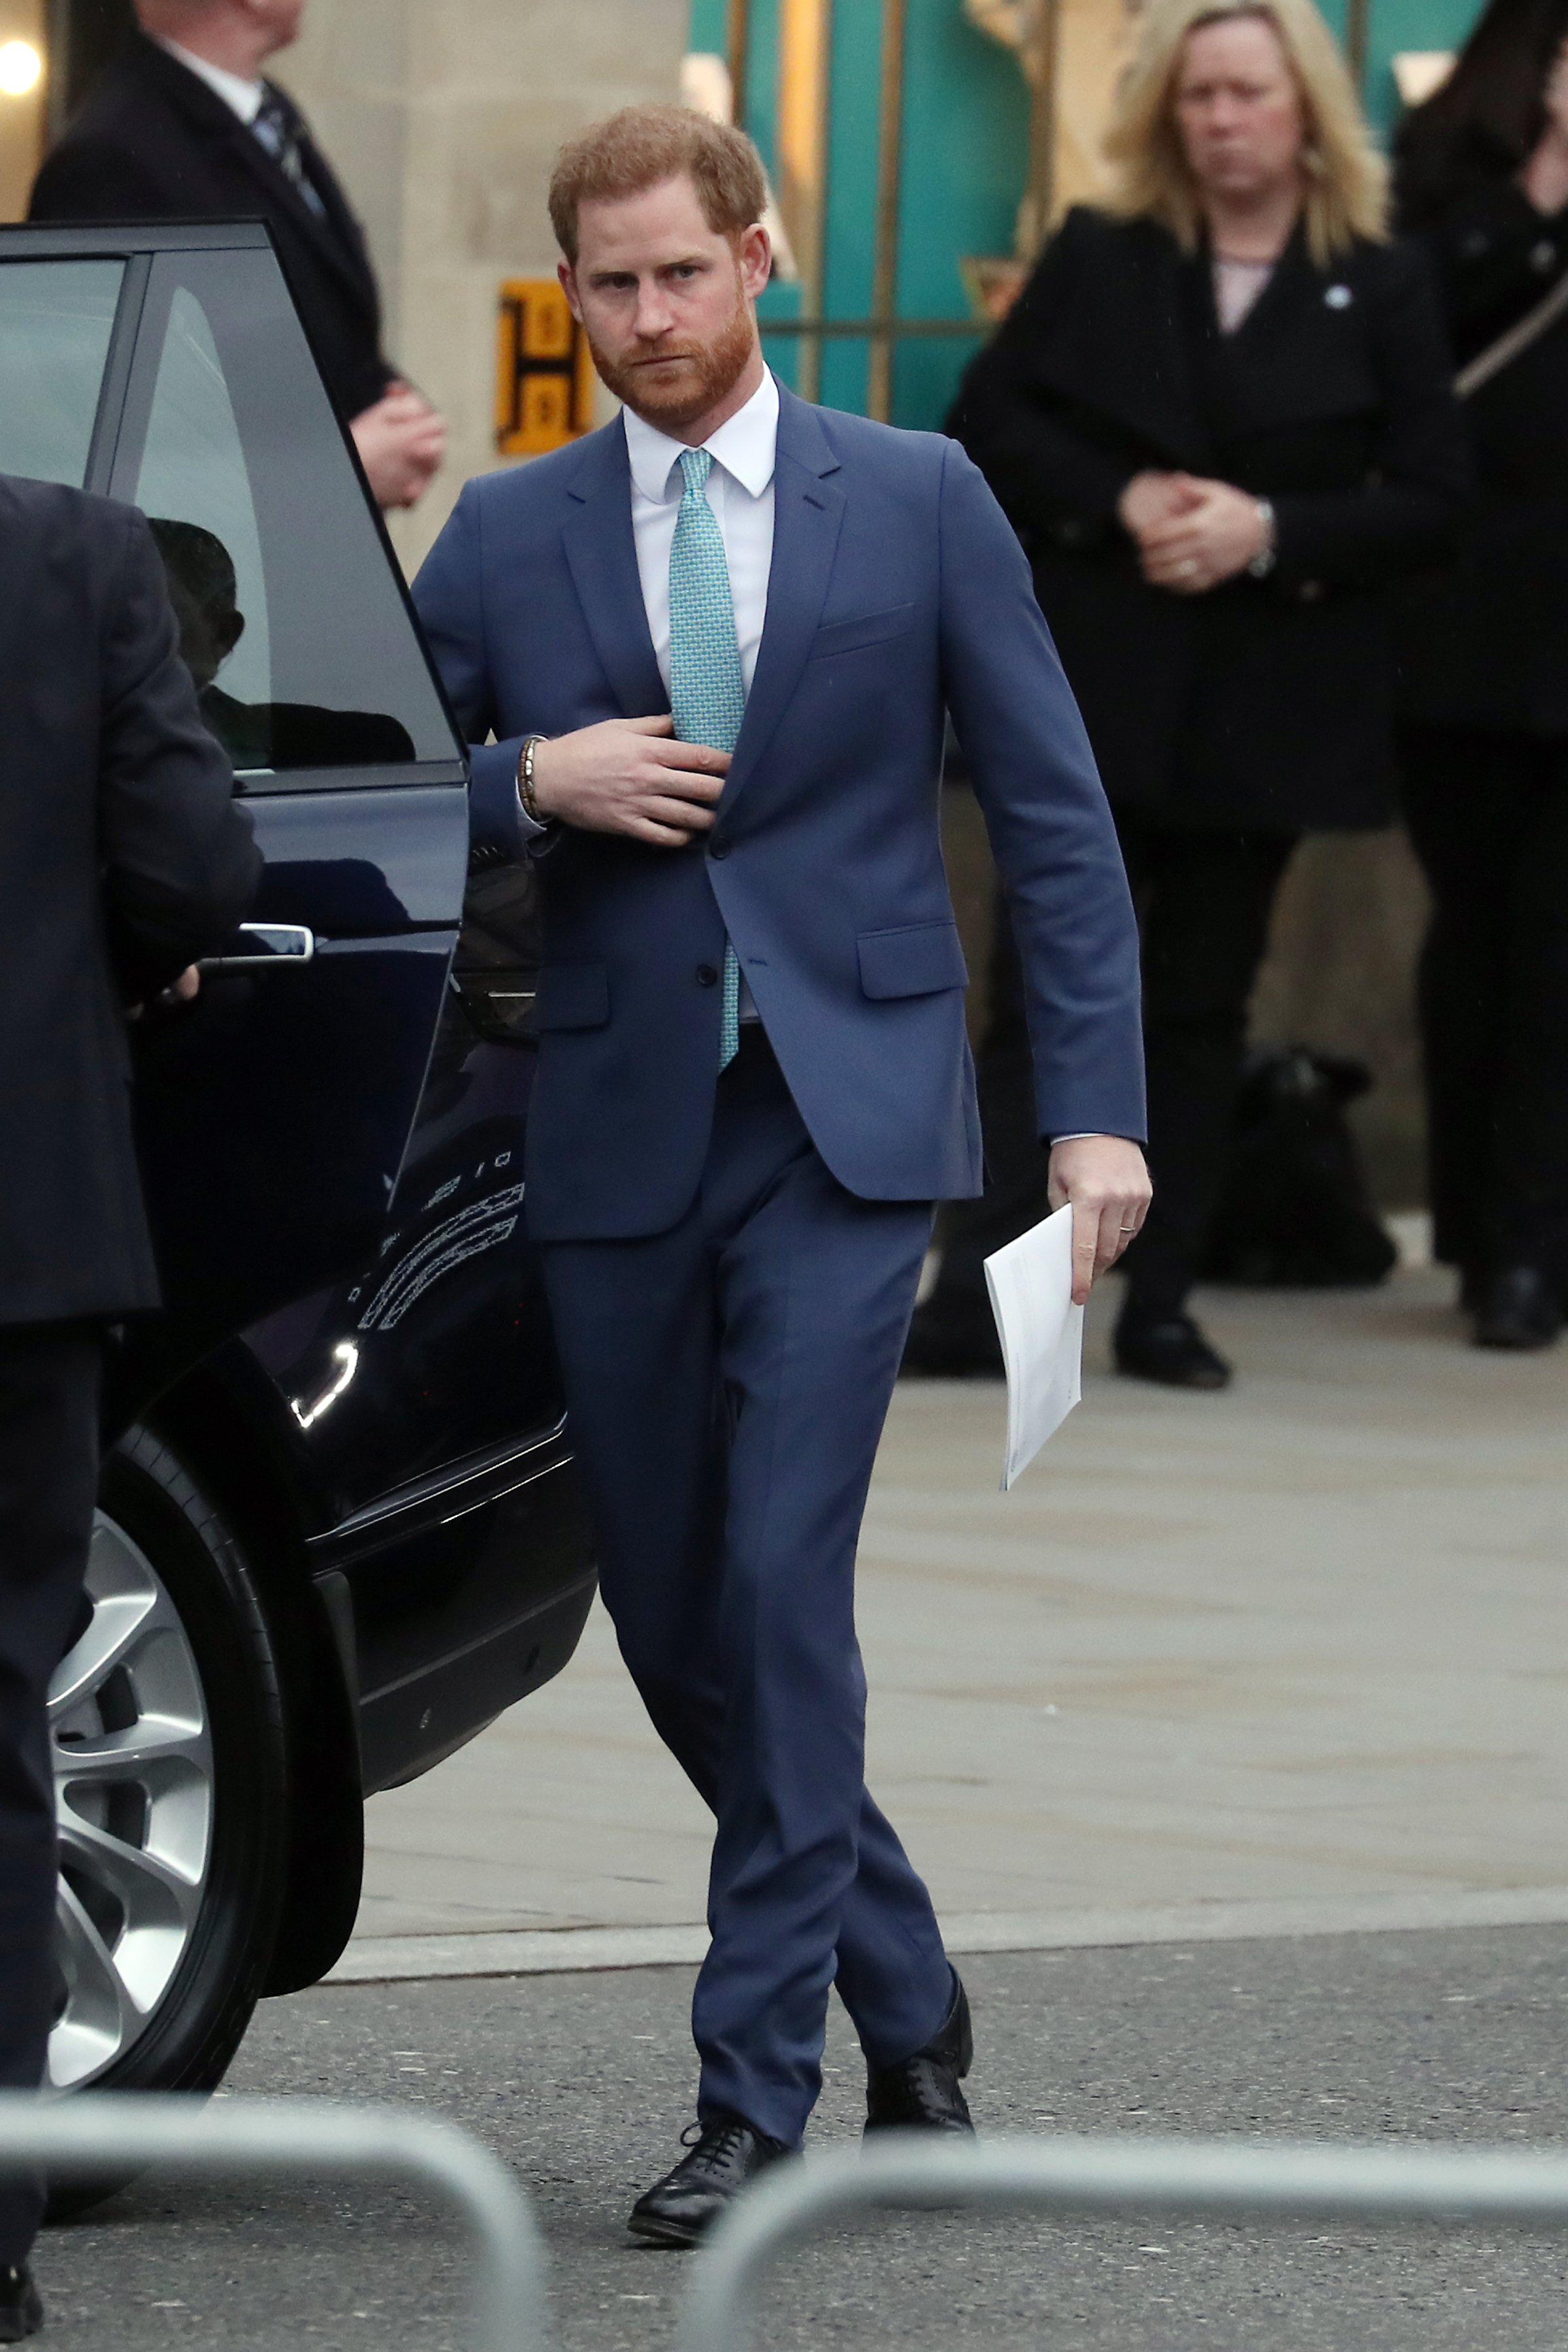 Prince Harry is captured on camera during attendance of the Commonwealth Day Service in London, England on March 9, 2020 | Photo: Getty Images